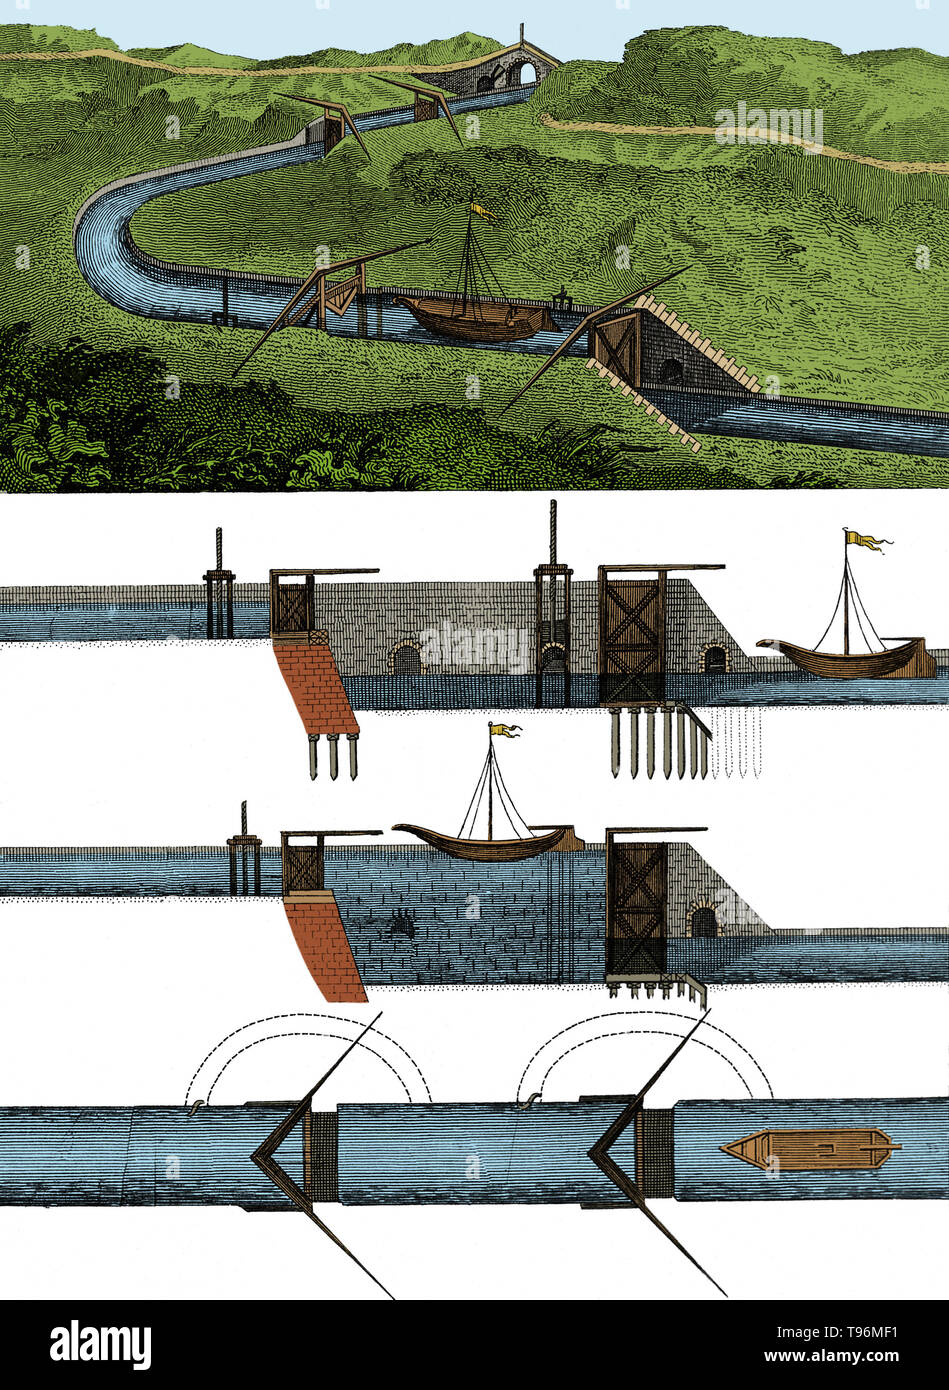 A canal passing through hilly terrain (above), and diagrams of canal locks and pressure-regulating mechanisms (below). Historical engraving. Stock Photo